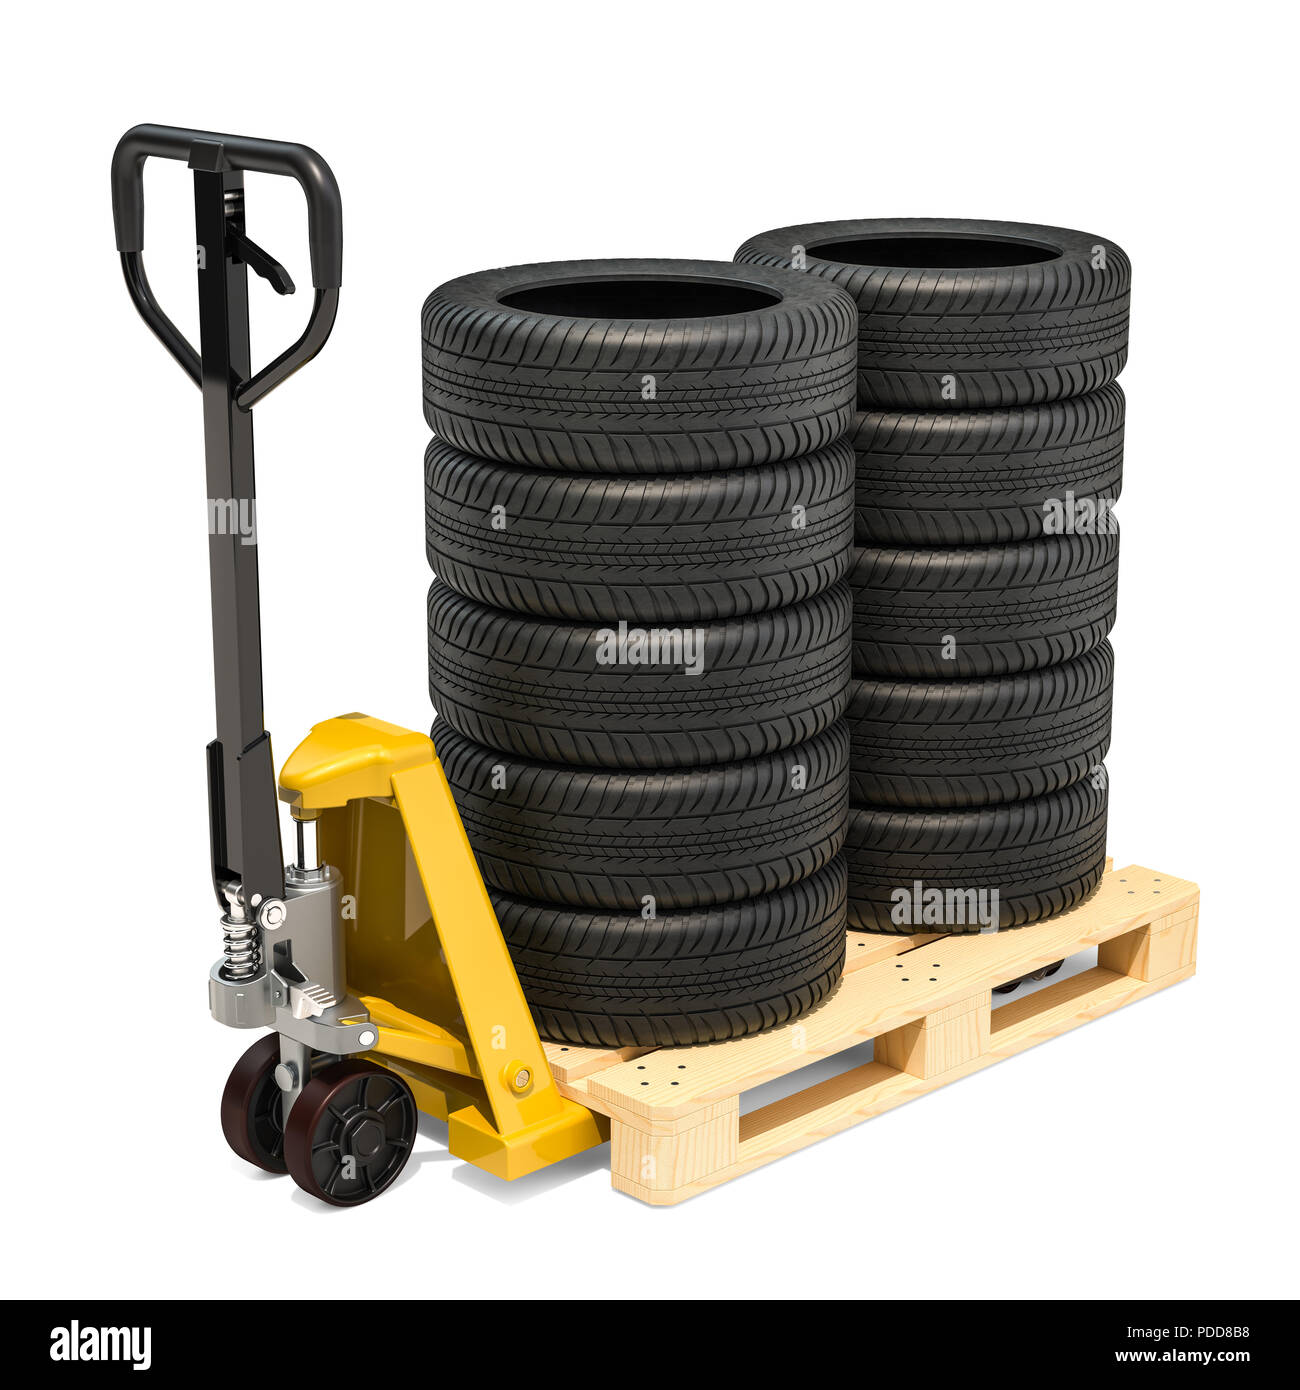 Pallet truck with car tires. 3D rendering isolated on white background Stock Photo